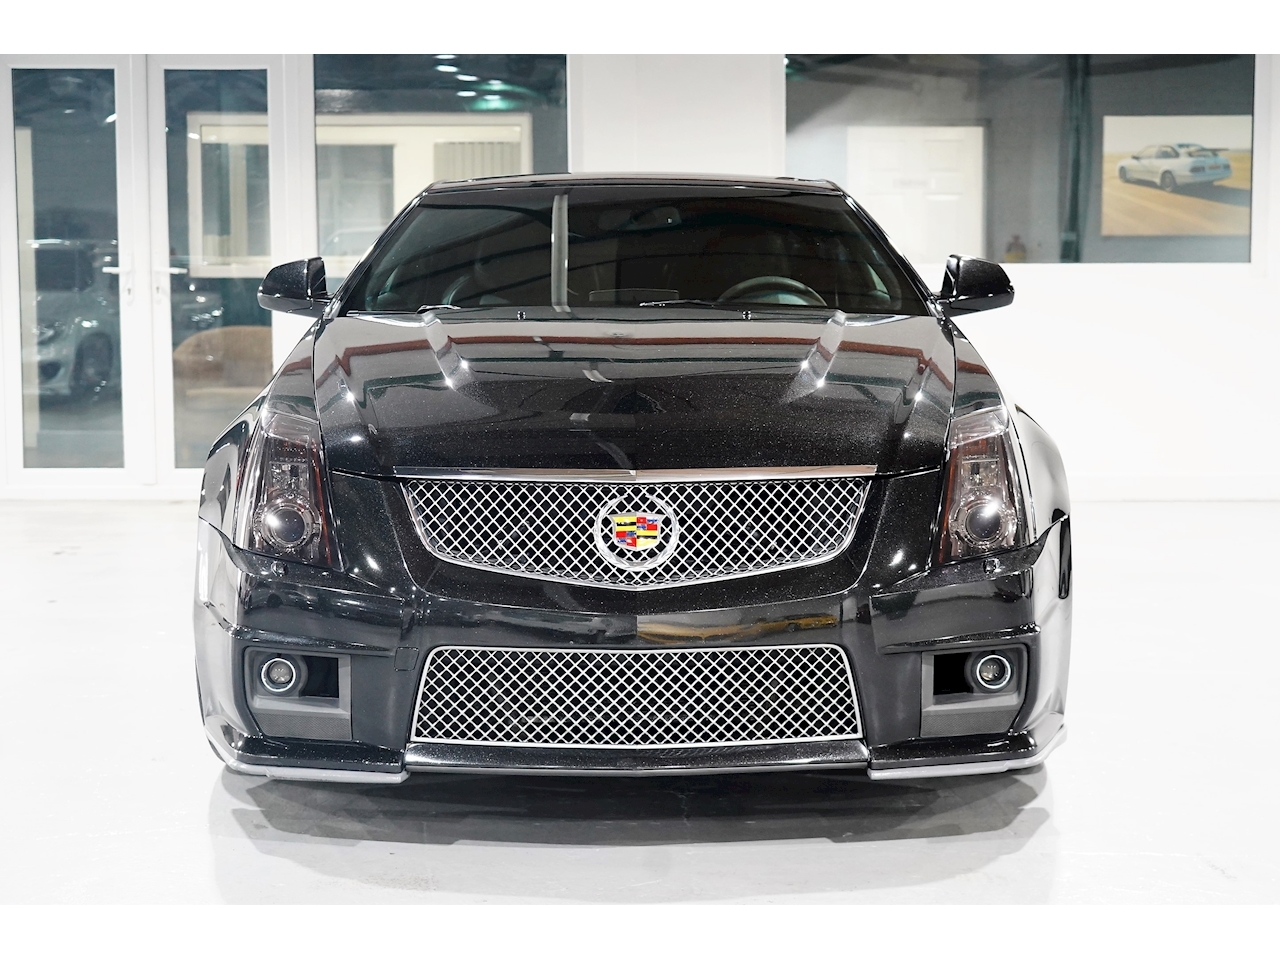 2011 Cadillac CTS-V 6.2 V8 Coupe - Diamond Edition - Supercharged LSA - Left Hand Drive